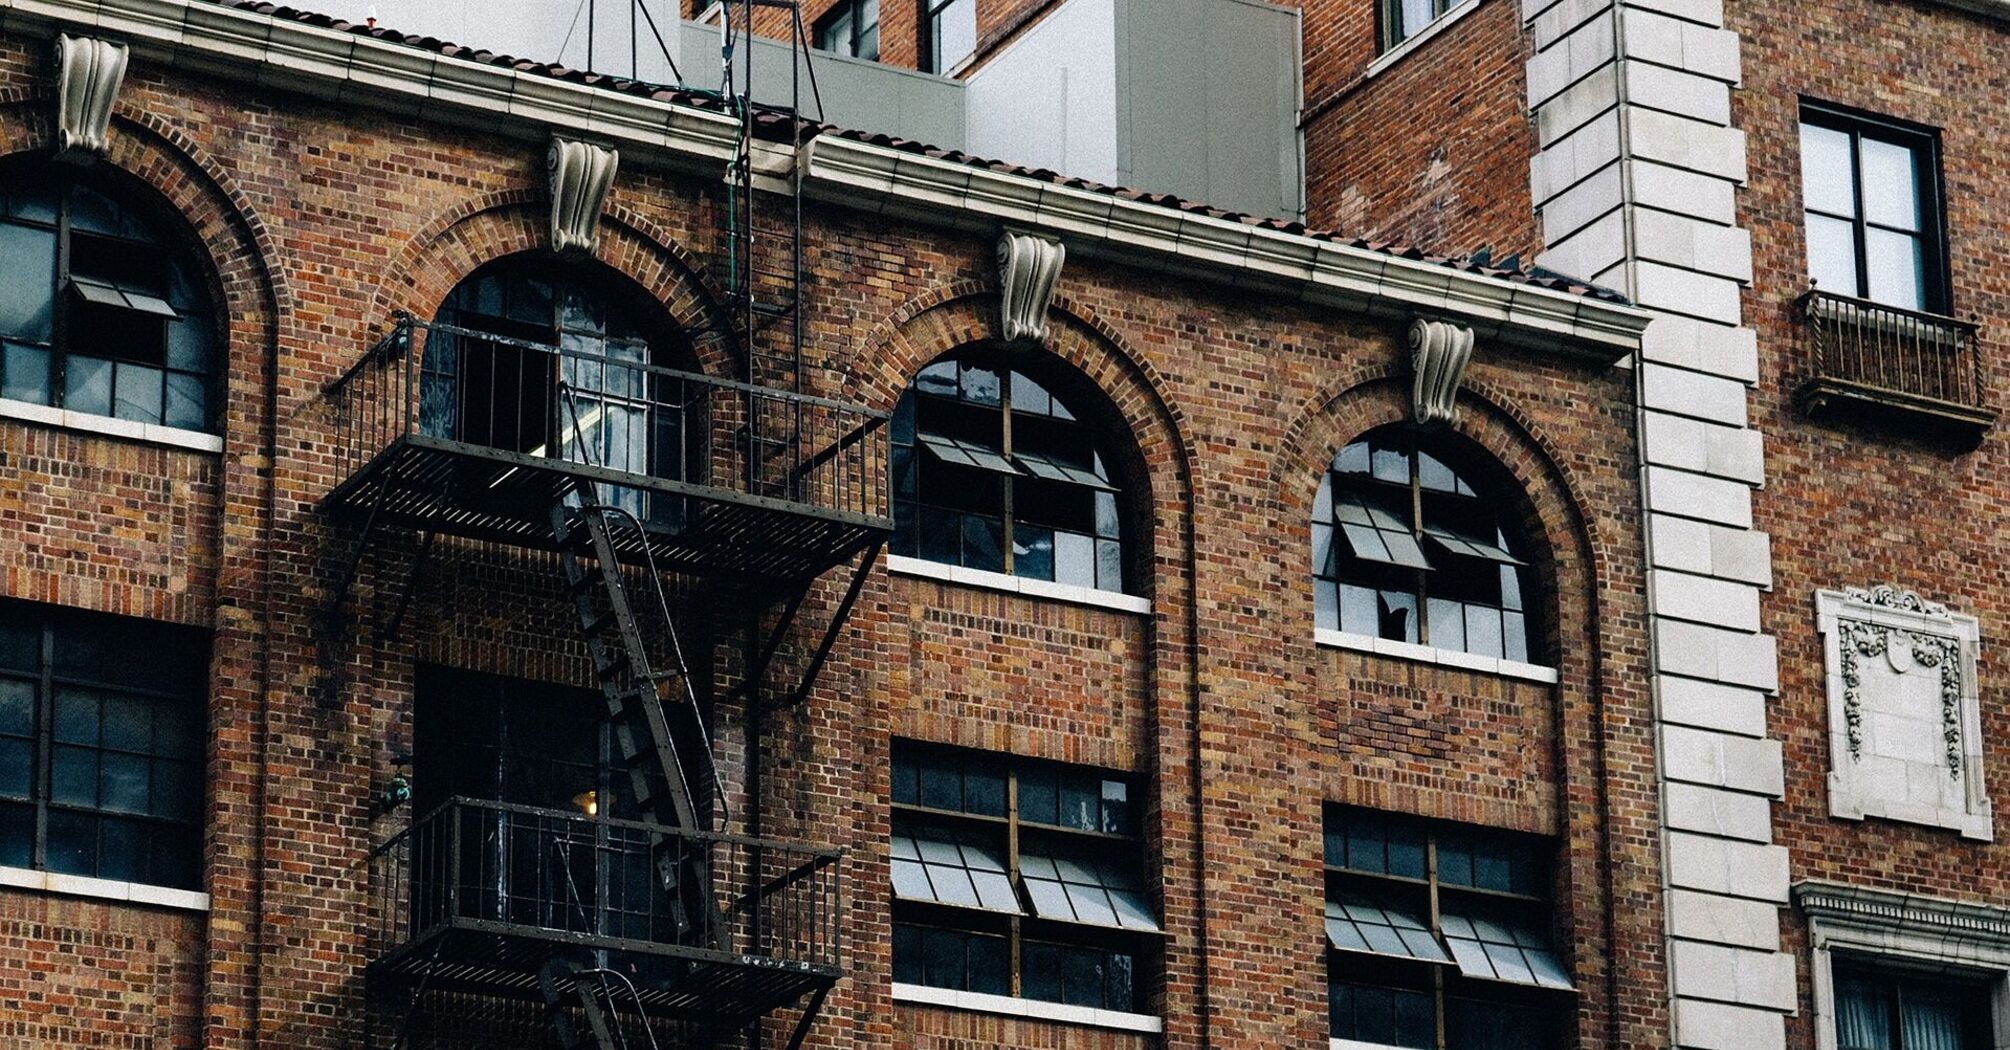 Old brick building with arched windows and an external metal fire escape staircase